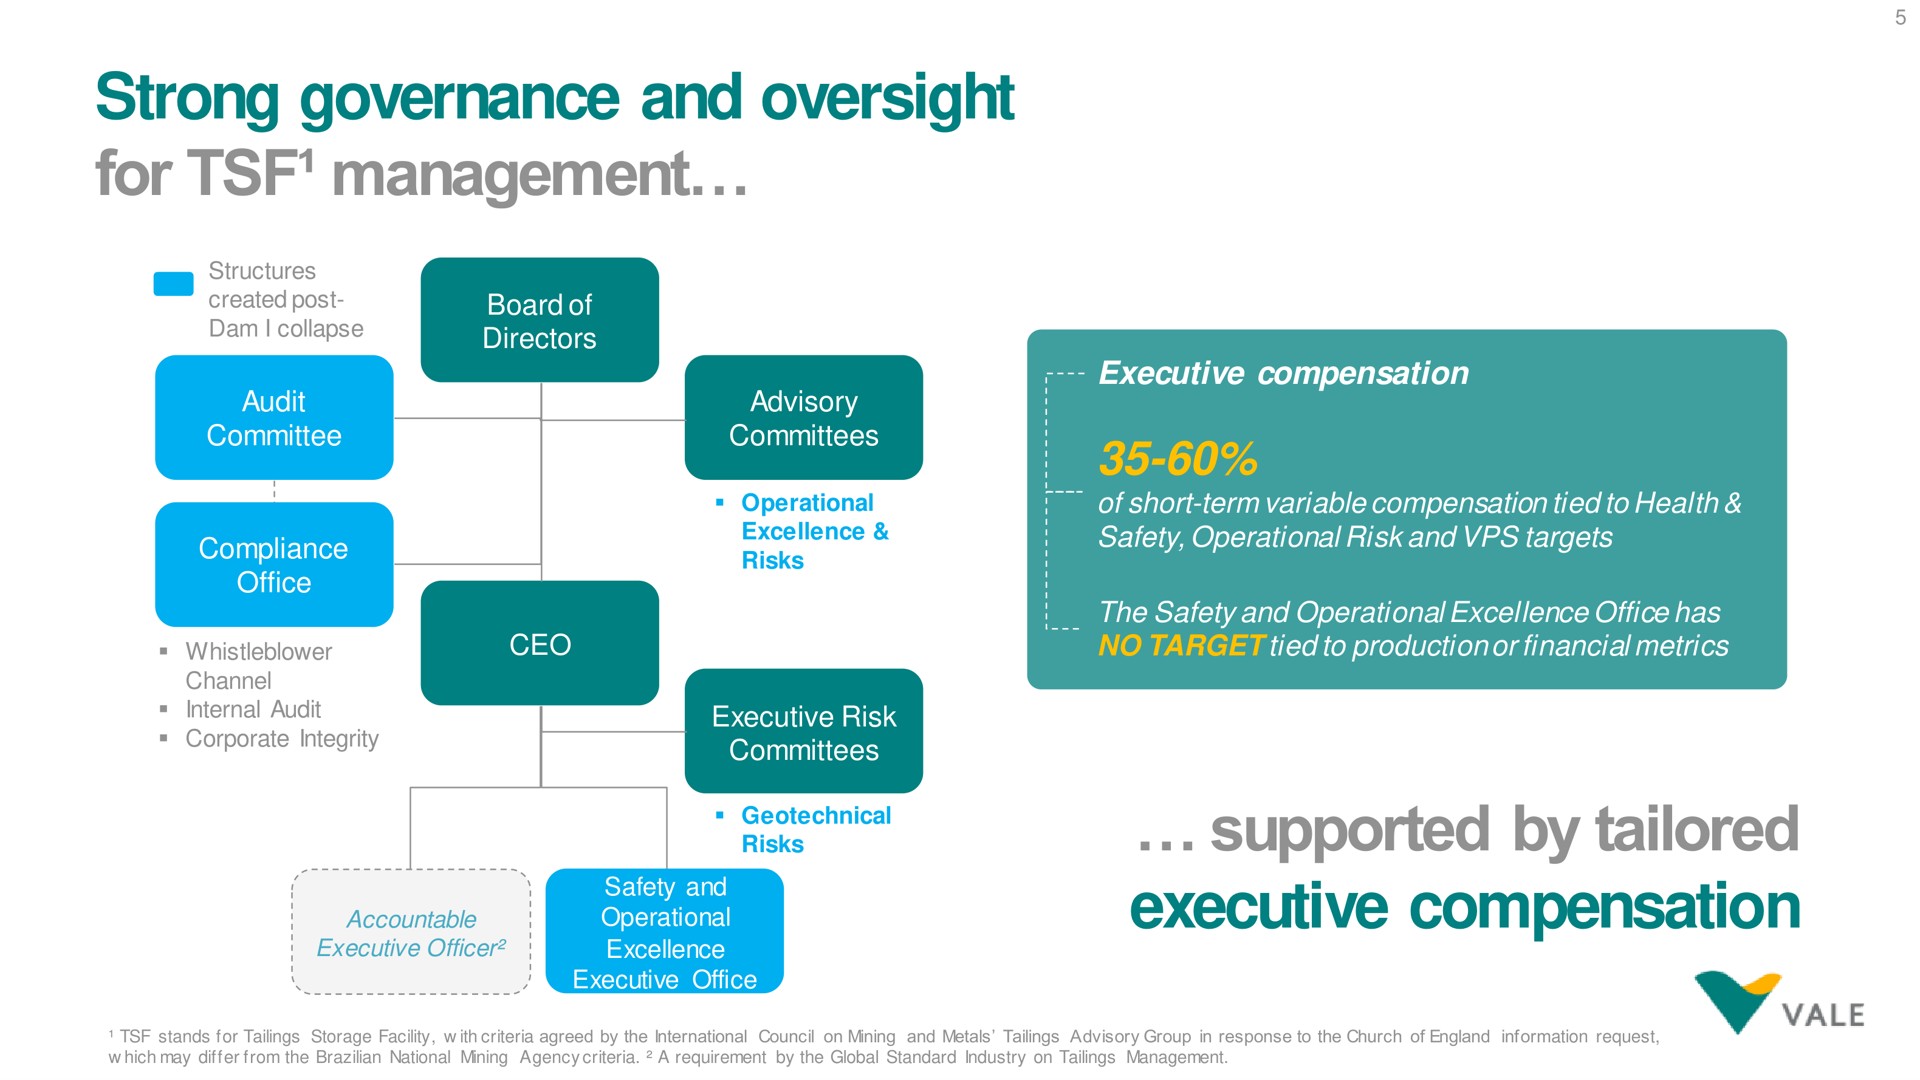 strong governance and oversight for management supported by tailored executive compensation risks | Vale